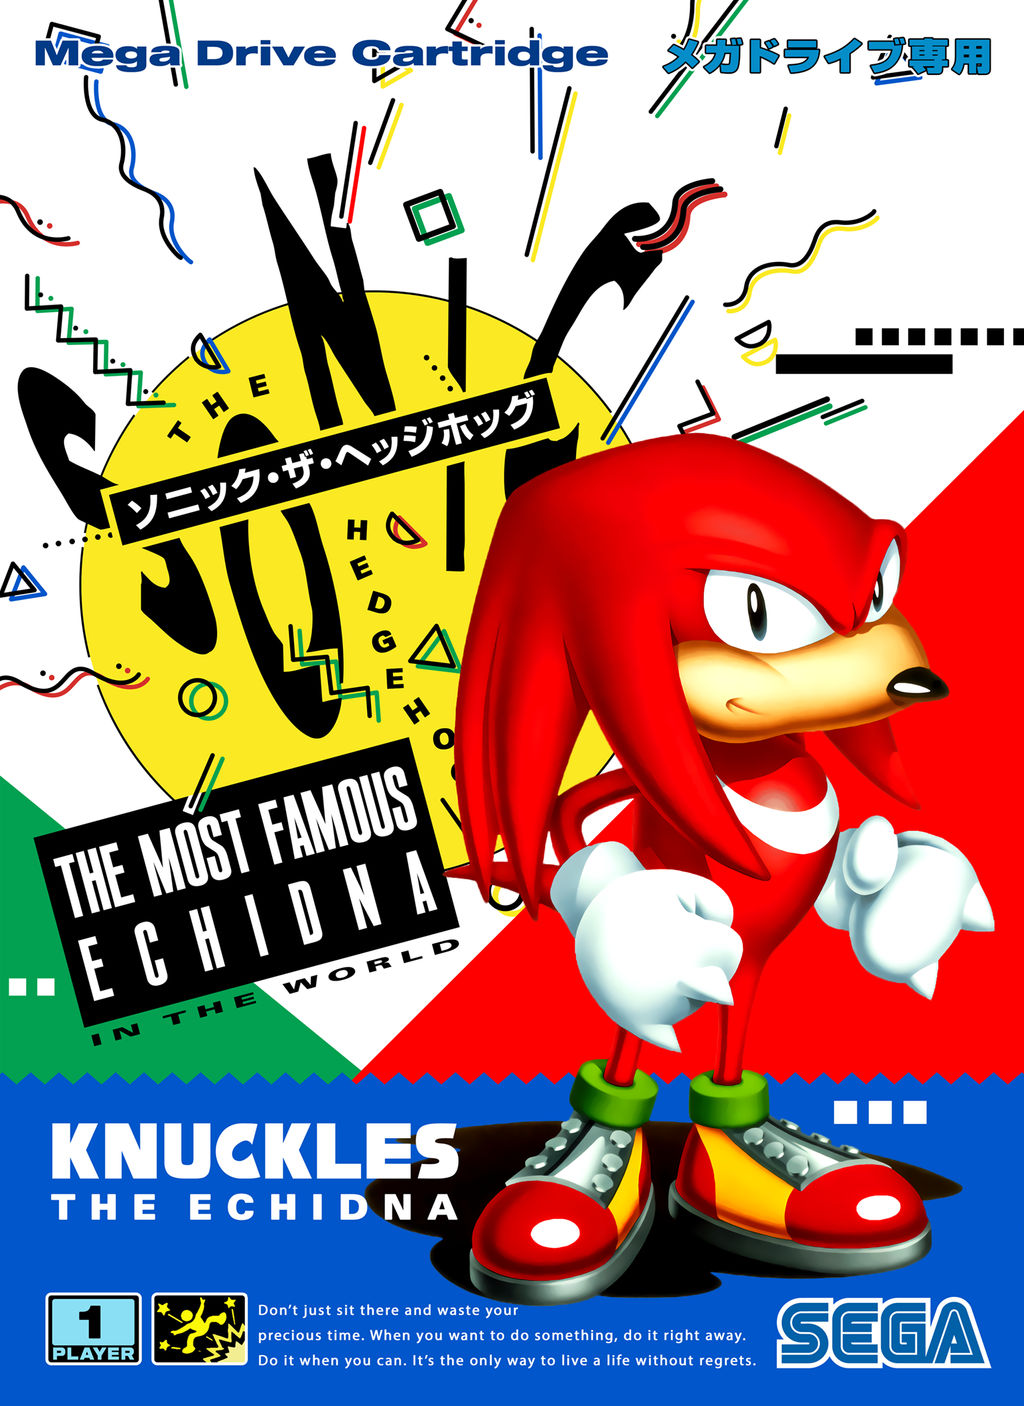 Knuckles the Echidna in Sonic the Hedgehog 2 (Genesis/Mega Drive Hack) :  r/3dsqrcodes